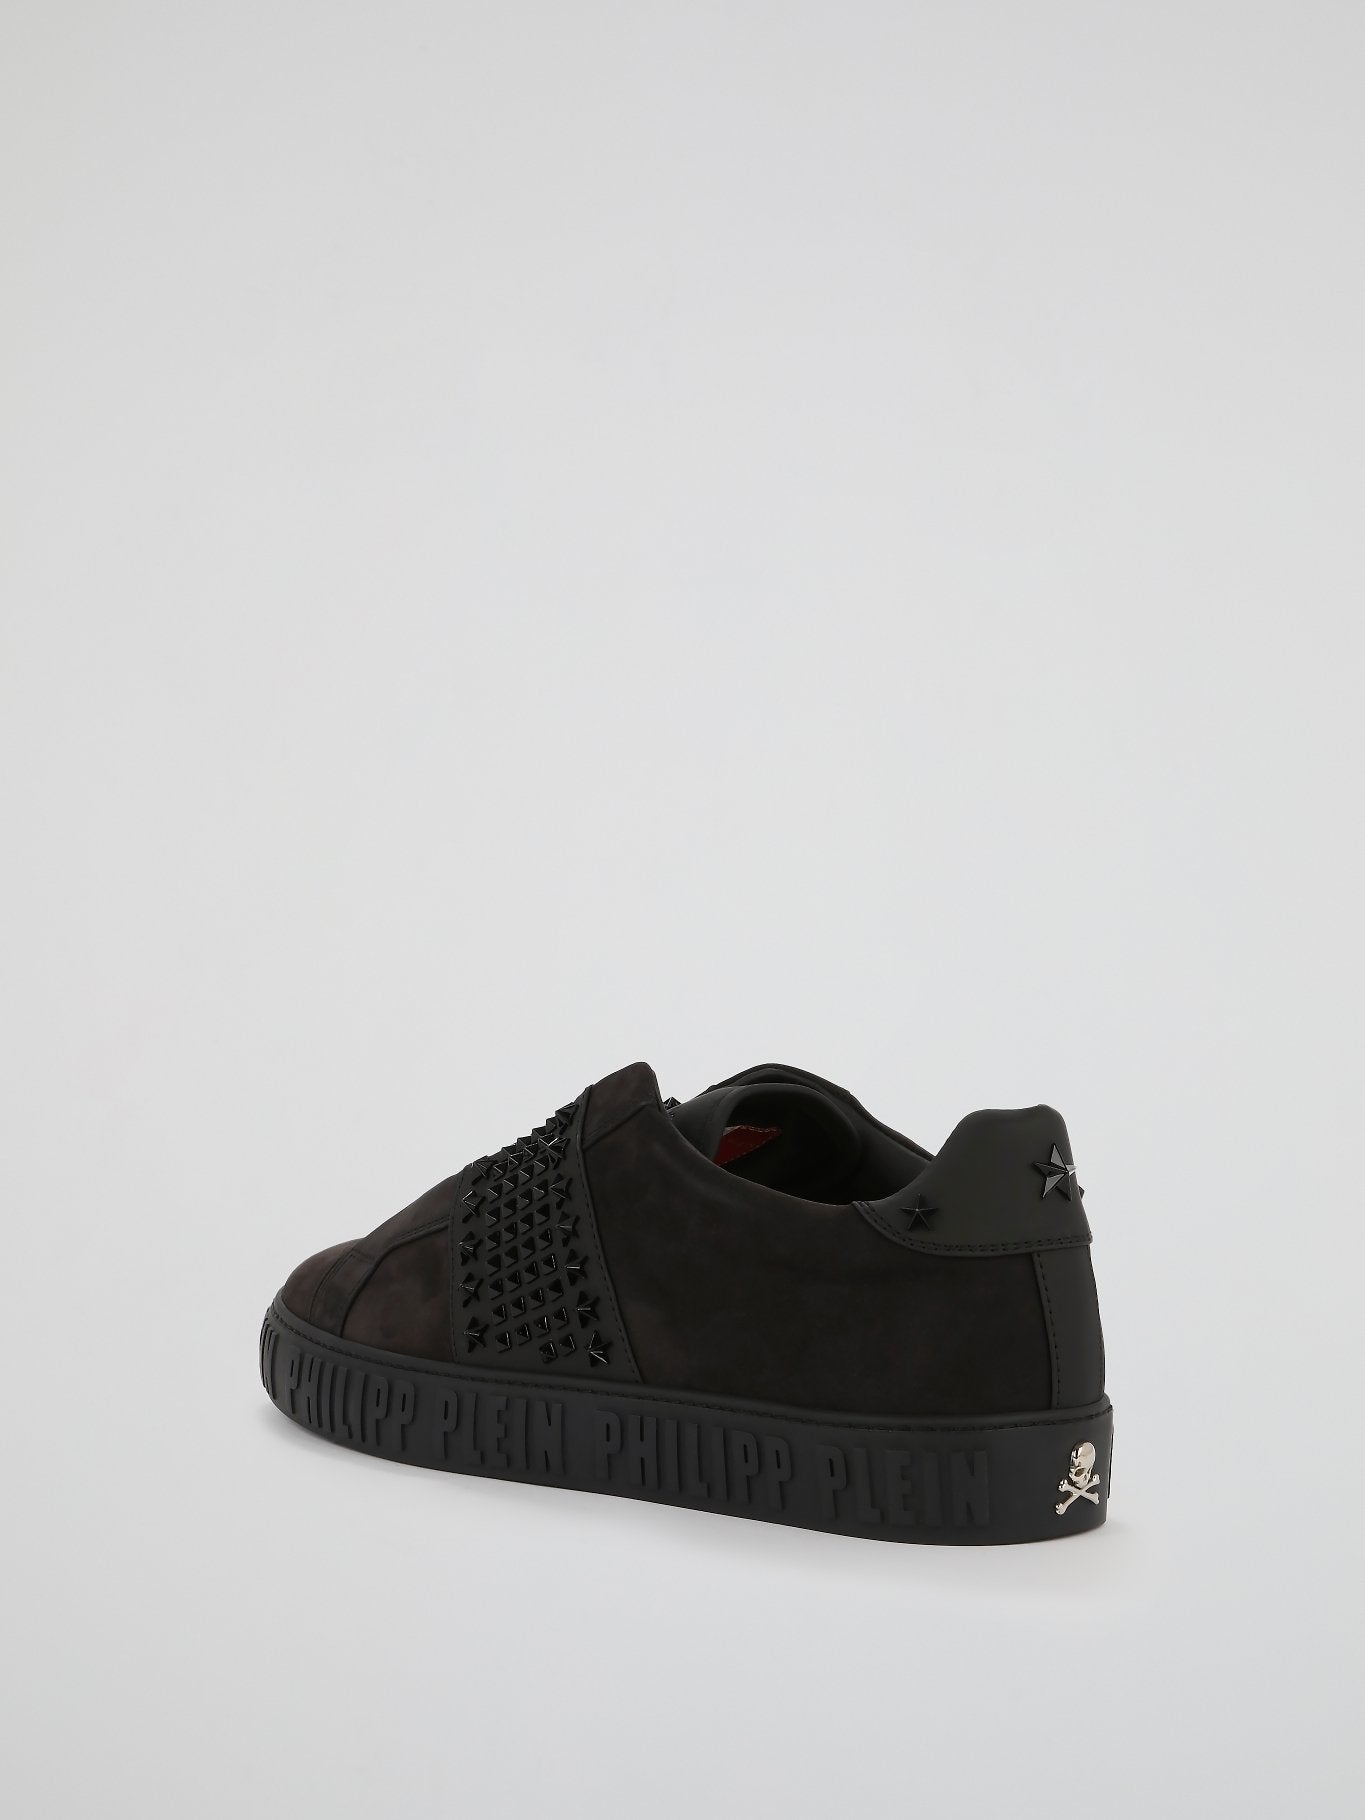 Black Spike Studded Low Top Sneakers